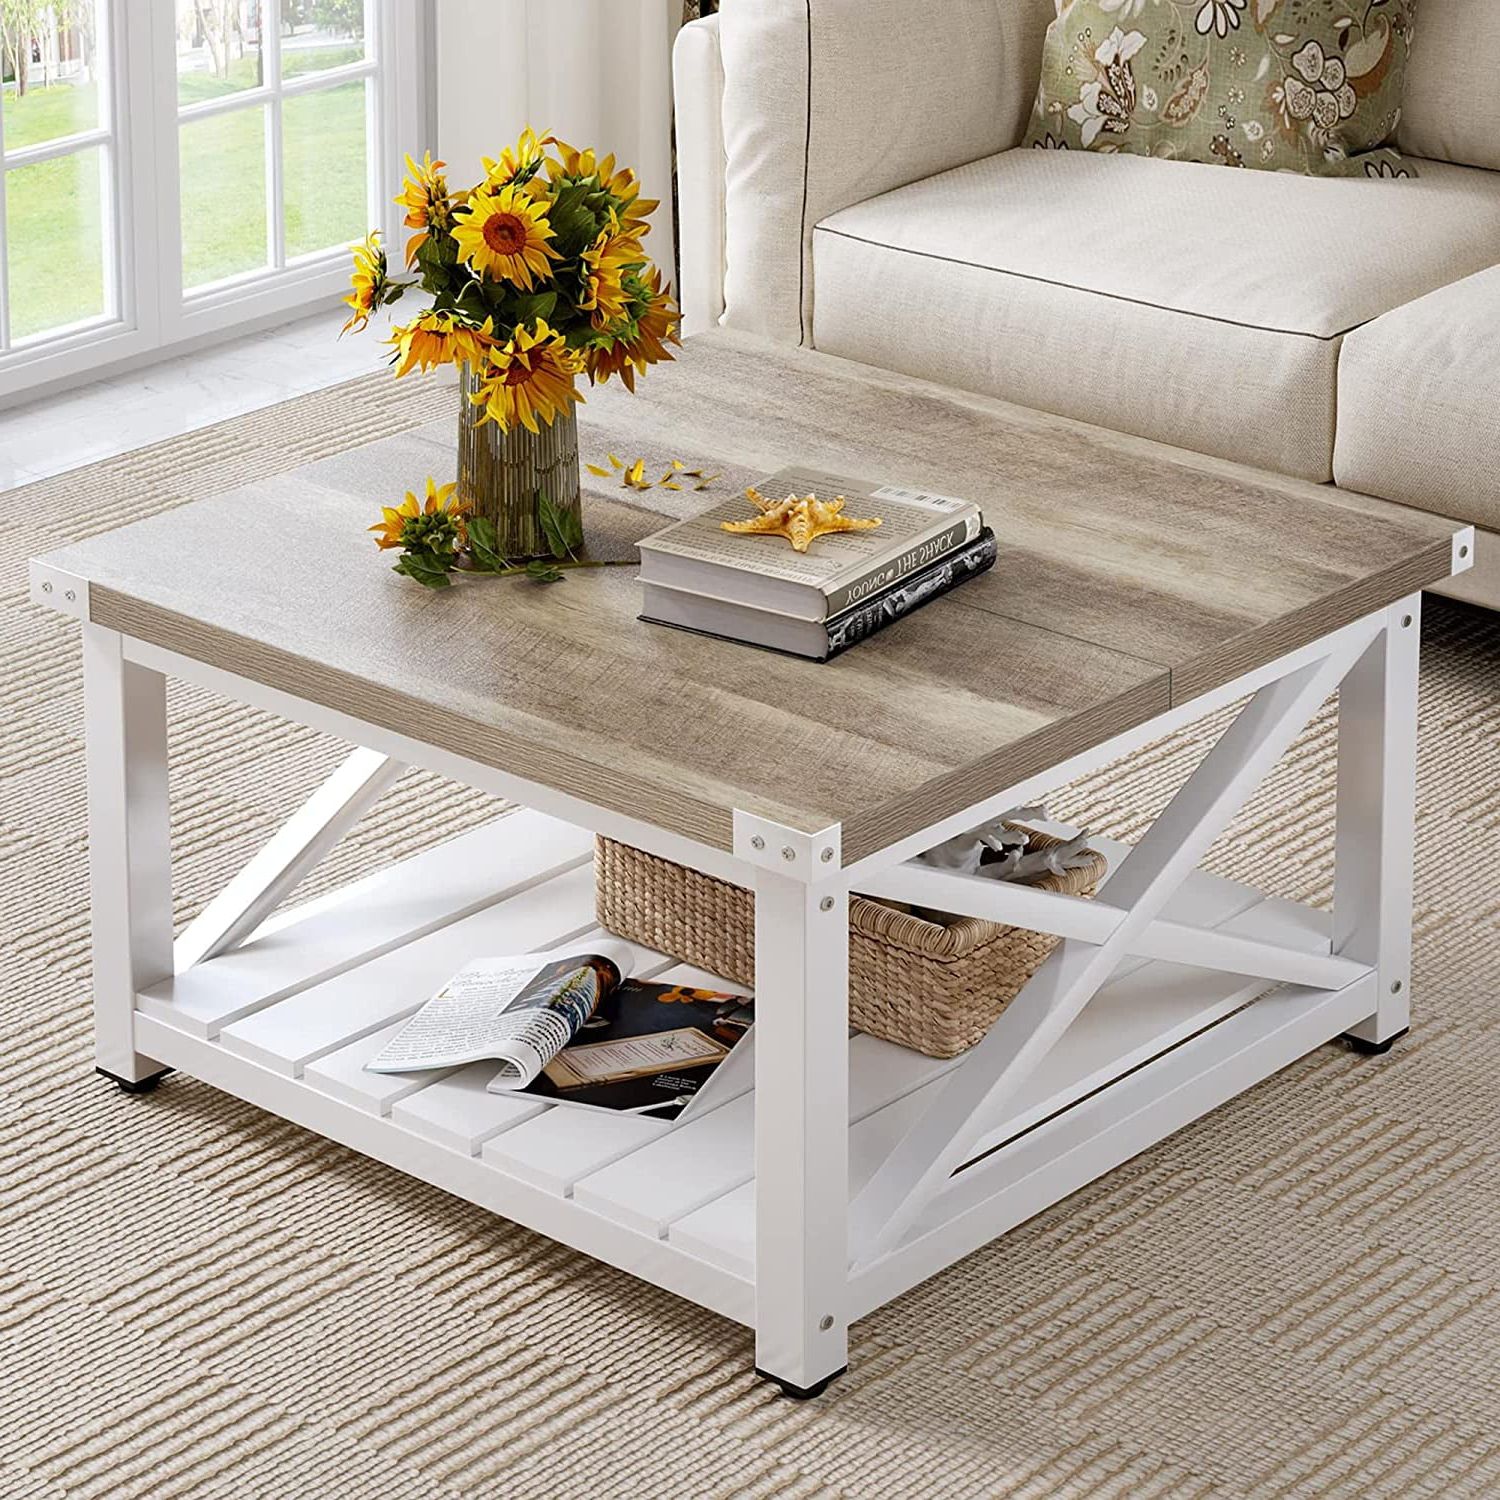 Trendy Living Room Farmhouse Coffee Tables With Dextrus Farmhouse Coffee Table For Living Room, Square Wood Coffee Table  With Open Storage Shelf – Walmart (View 2 of 10)